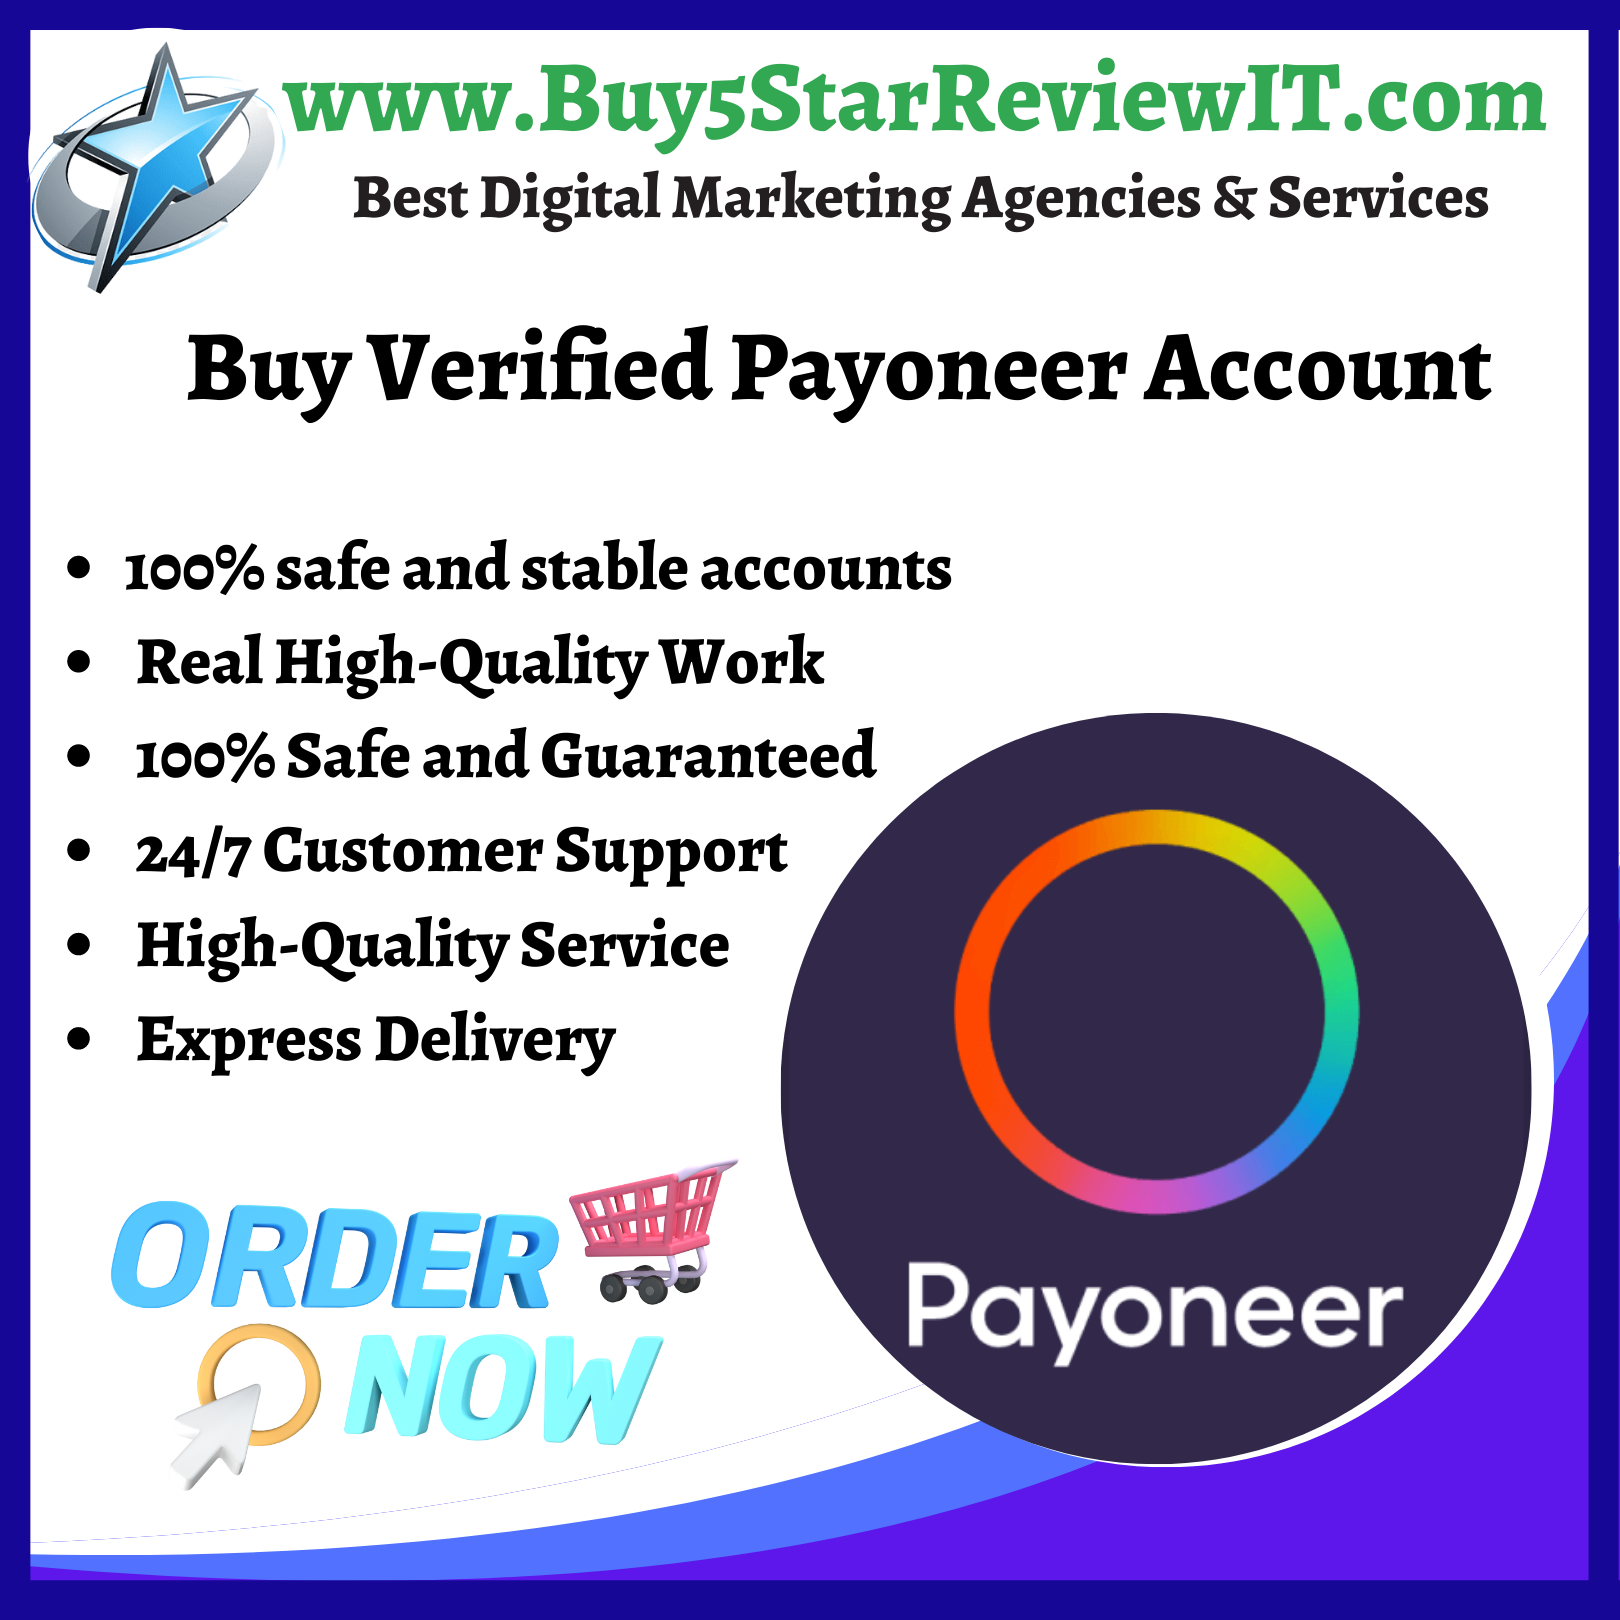 Buy Verified Payoneer Account - Buy 5 Star Review IT